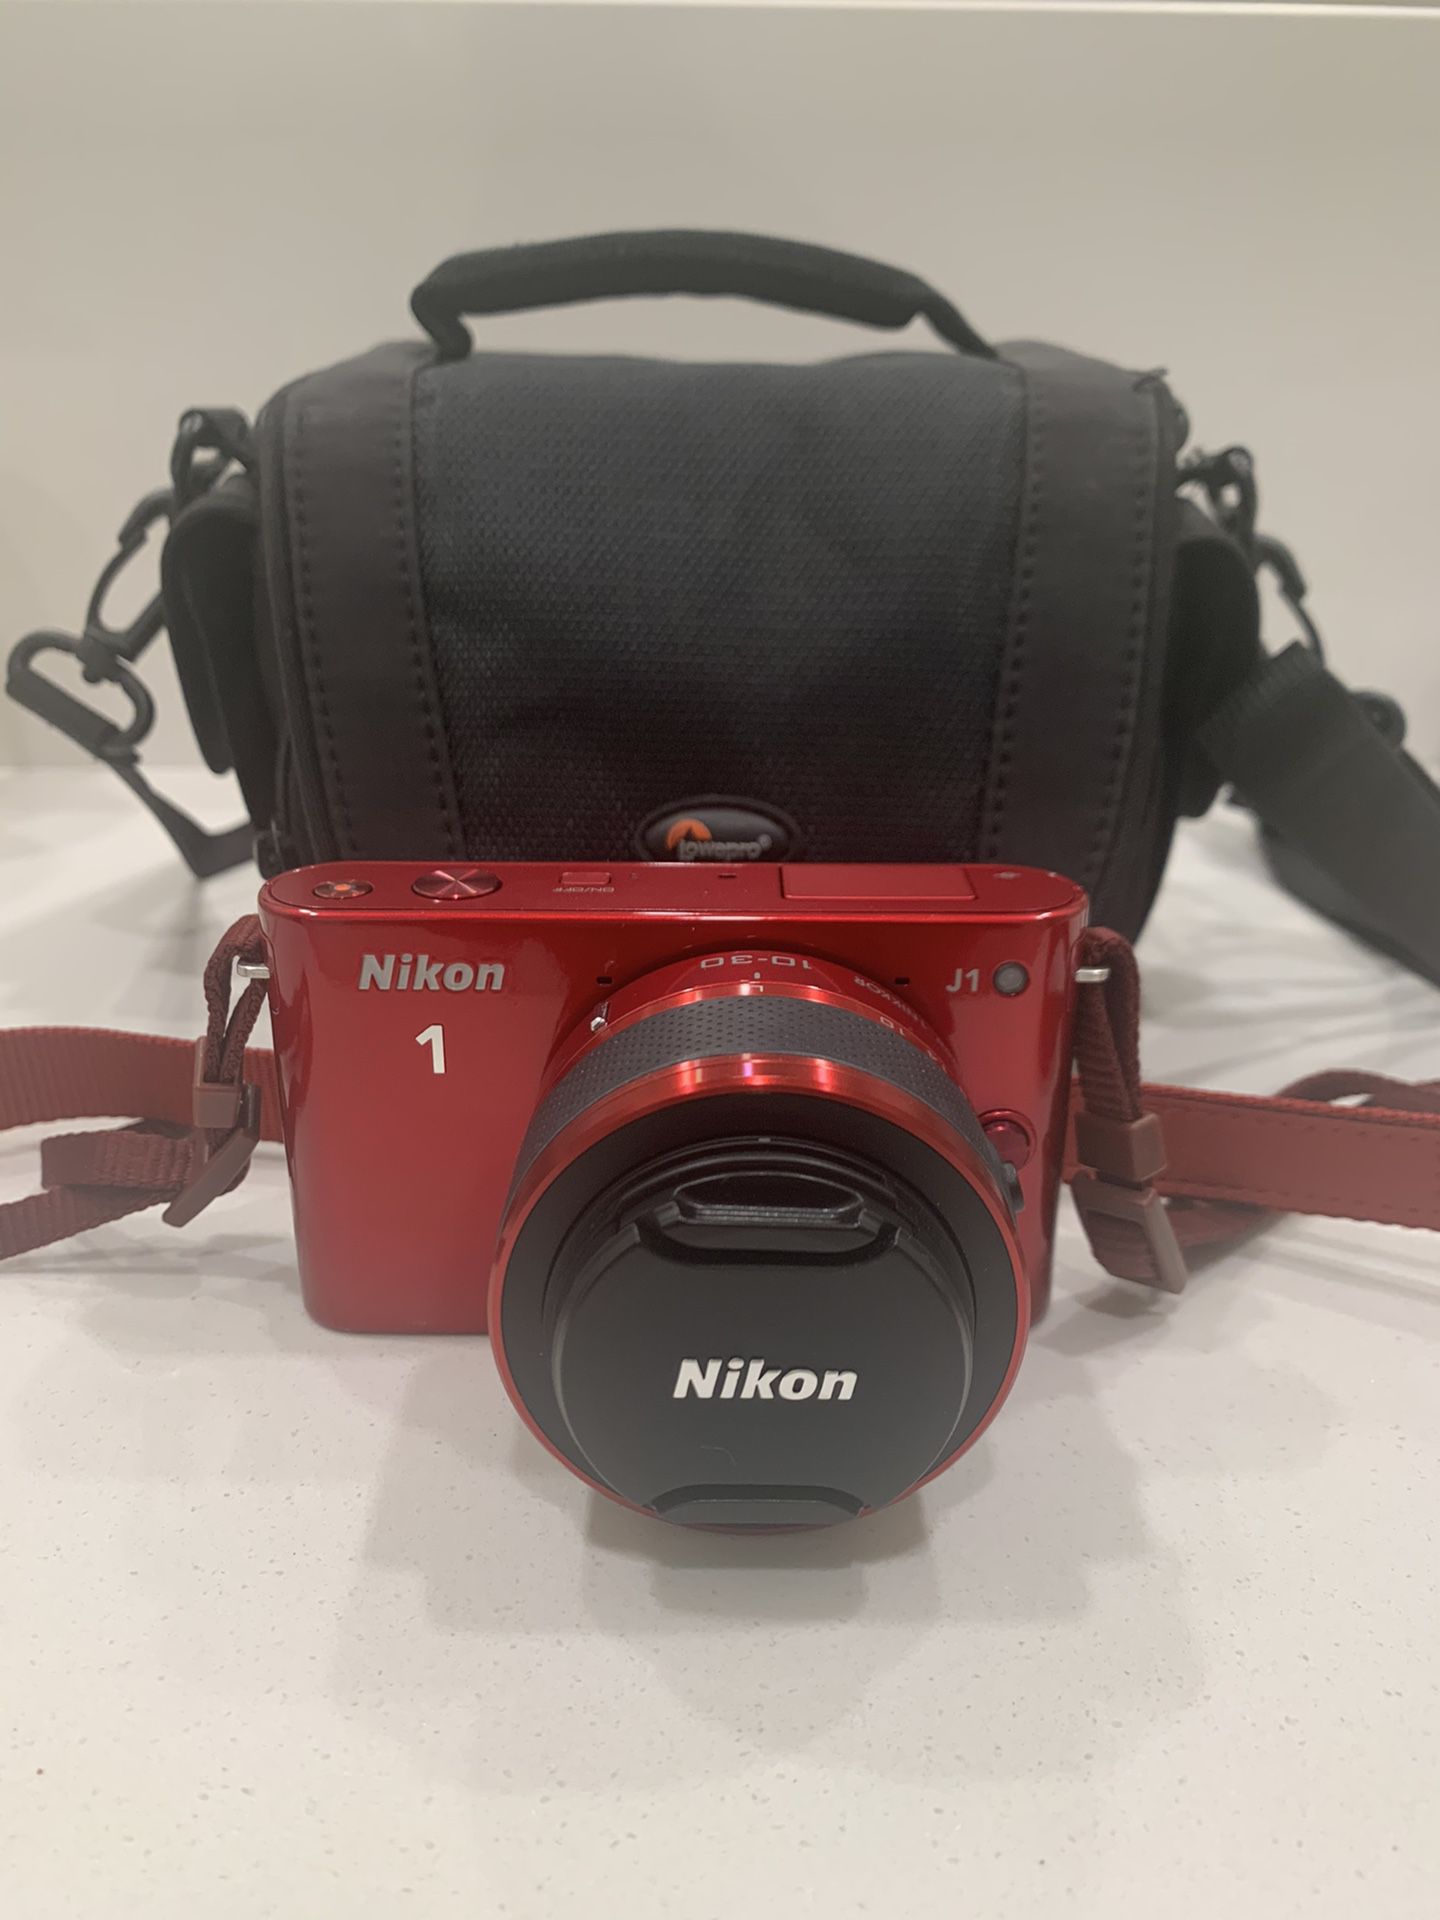 Red Nikon 1 camera with zoom in lens and bag